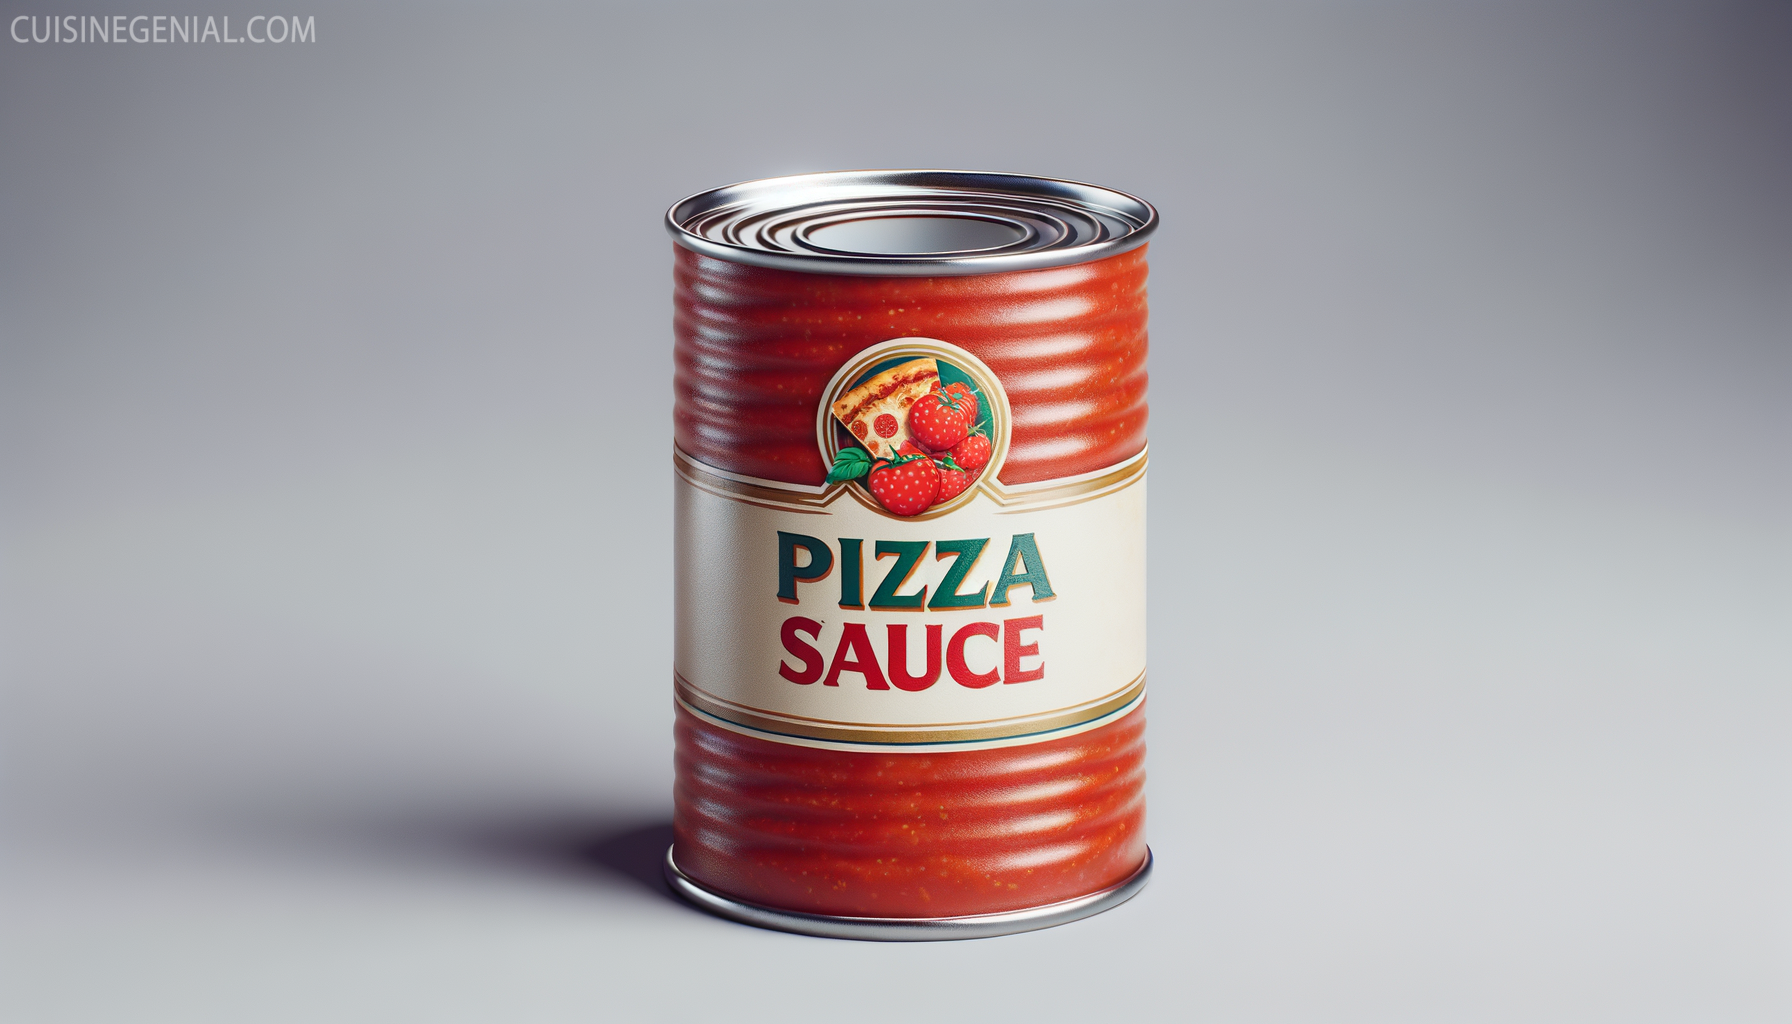 Realistic can of Don Pepino Pizza Sauce without any visible text